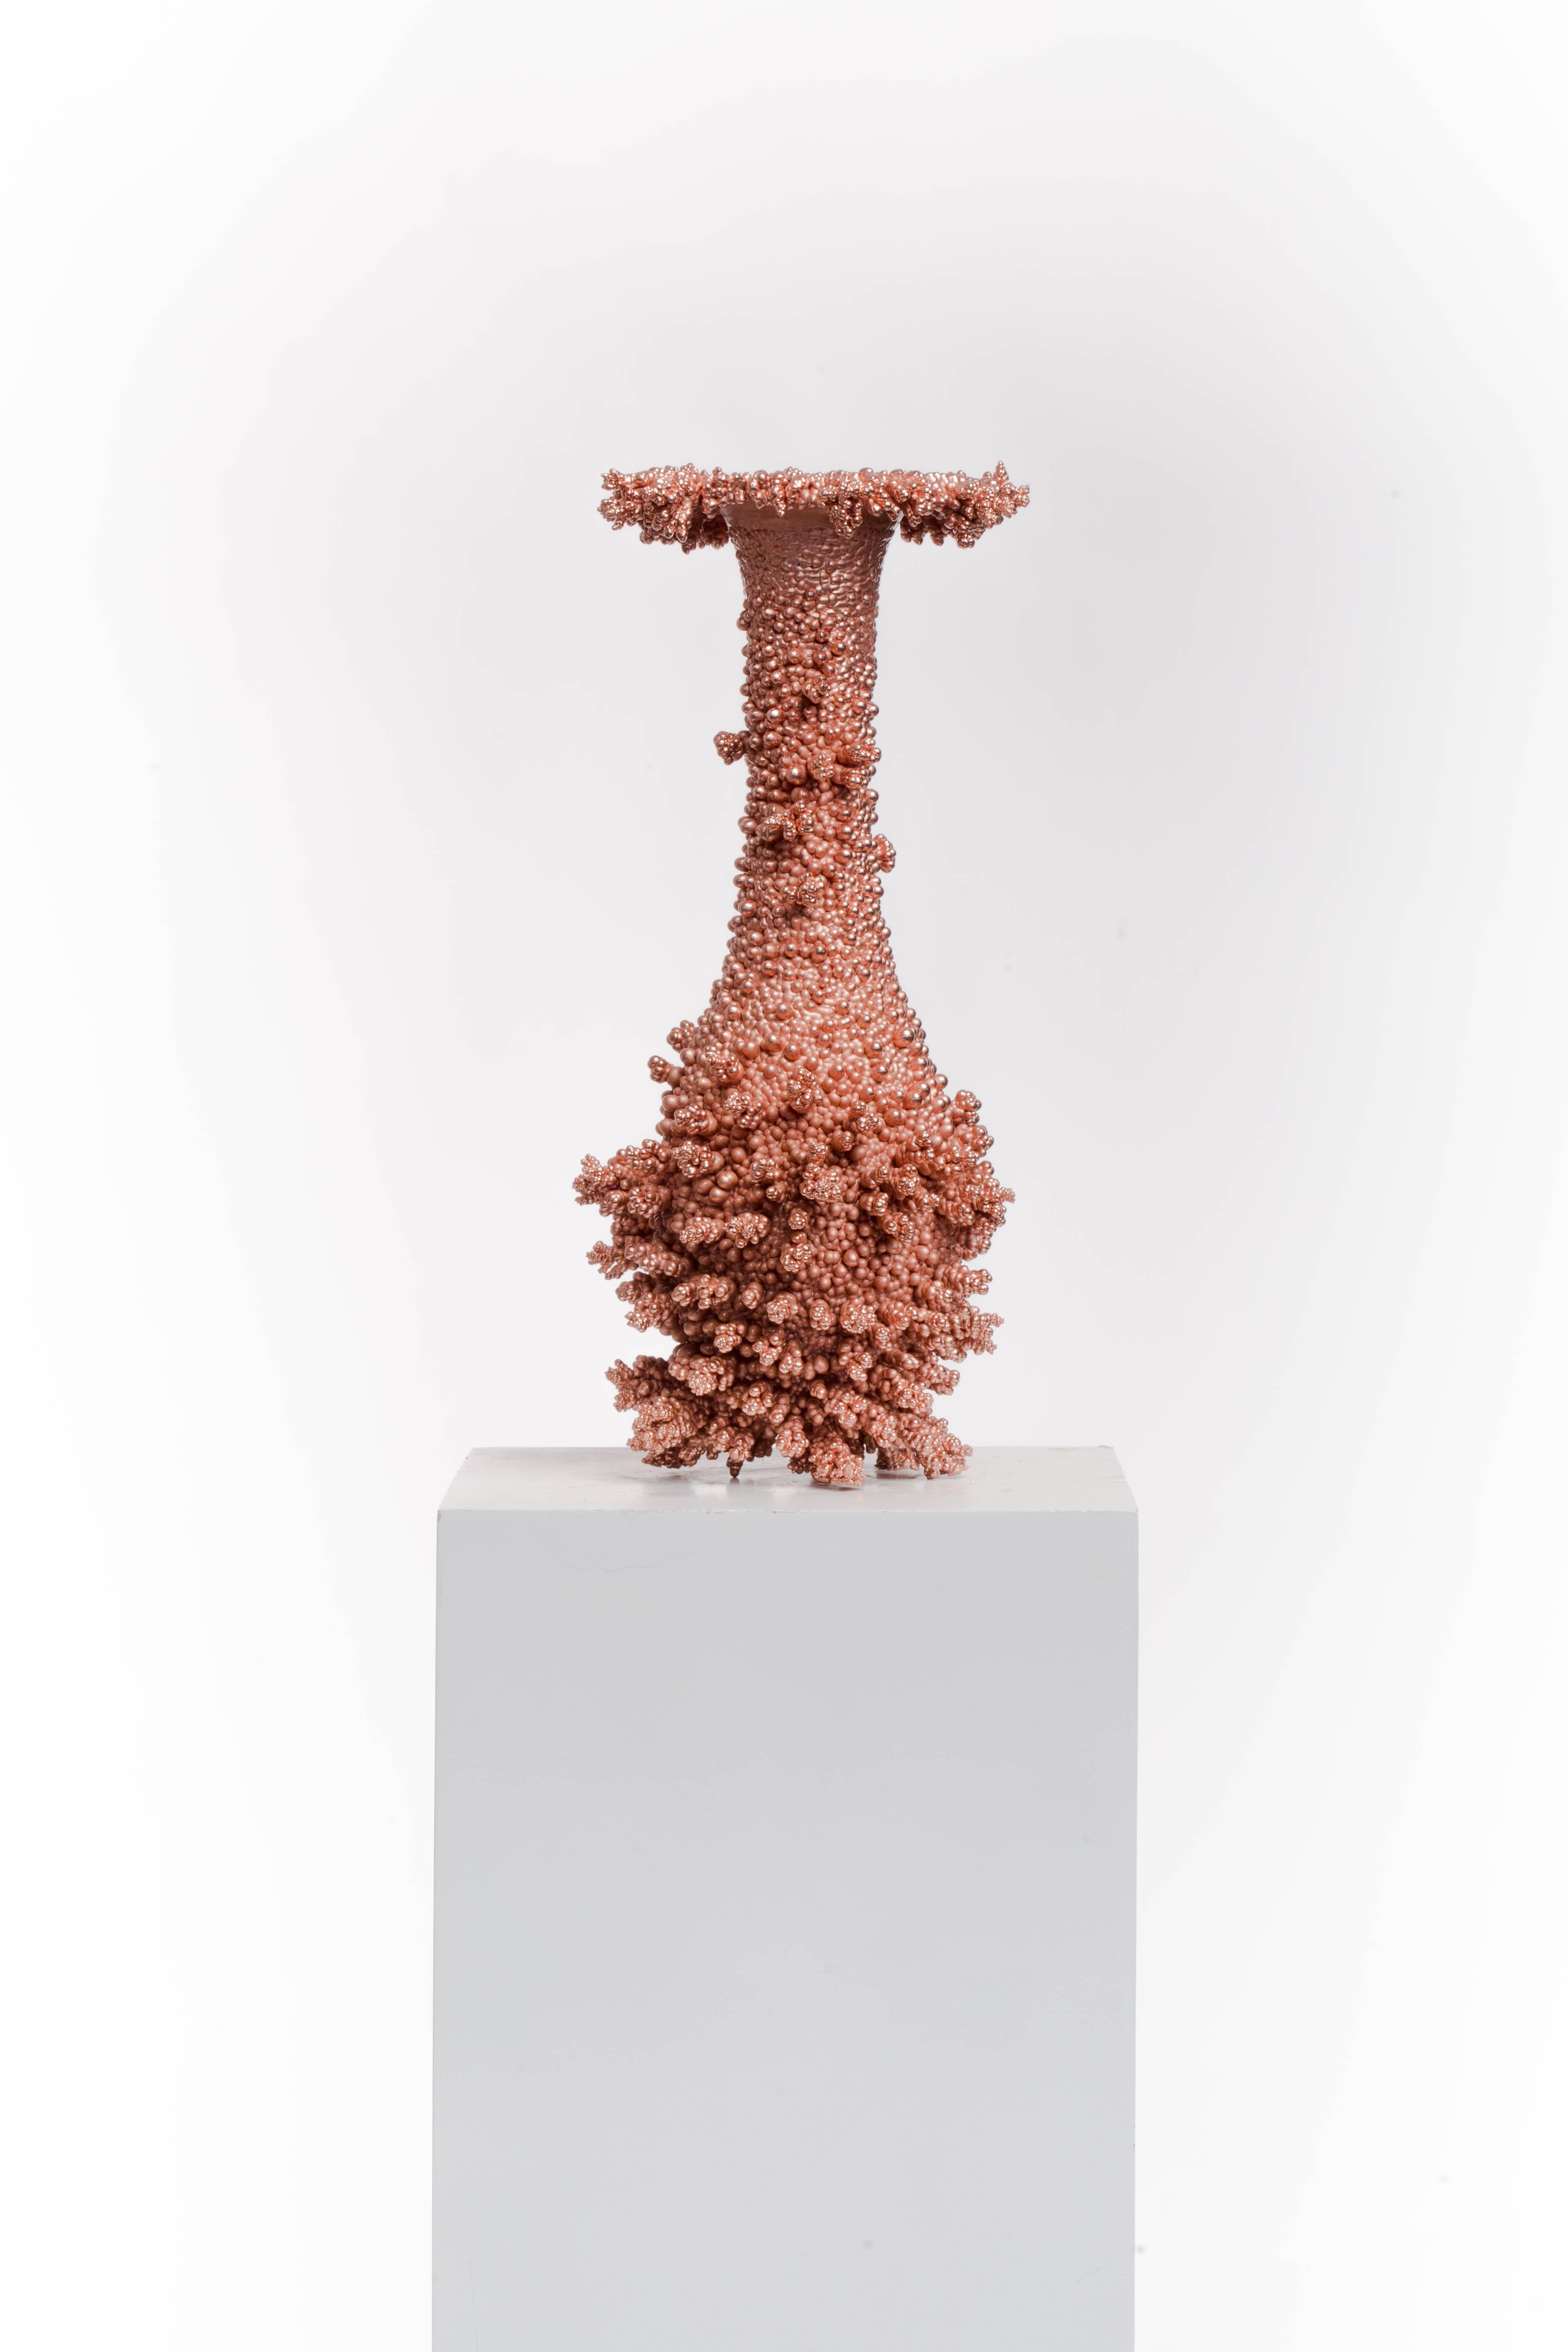 Copper, Crystal, Polished, Raw, Abstract, Contemporary, Modern, Art, Sculpture - Gray Abstract Sculpture by Driaan Claassen